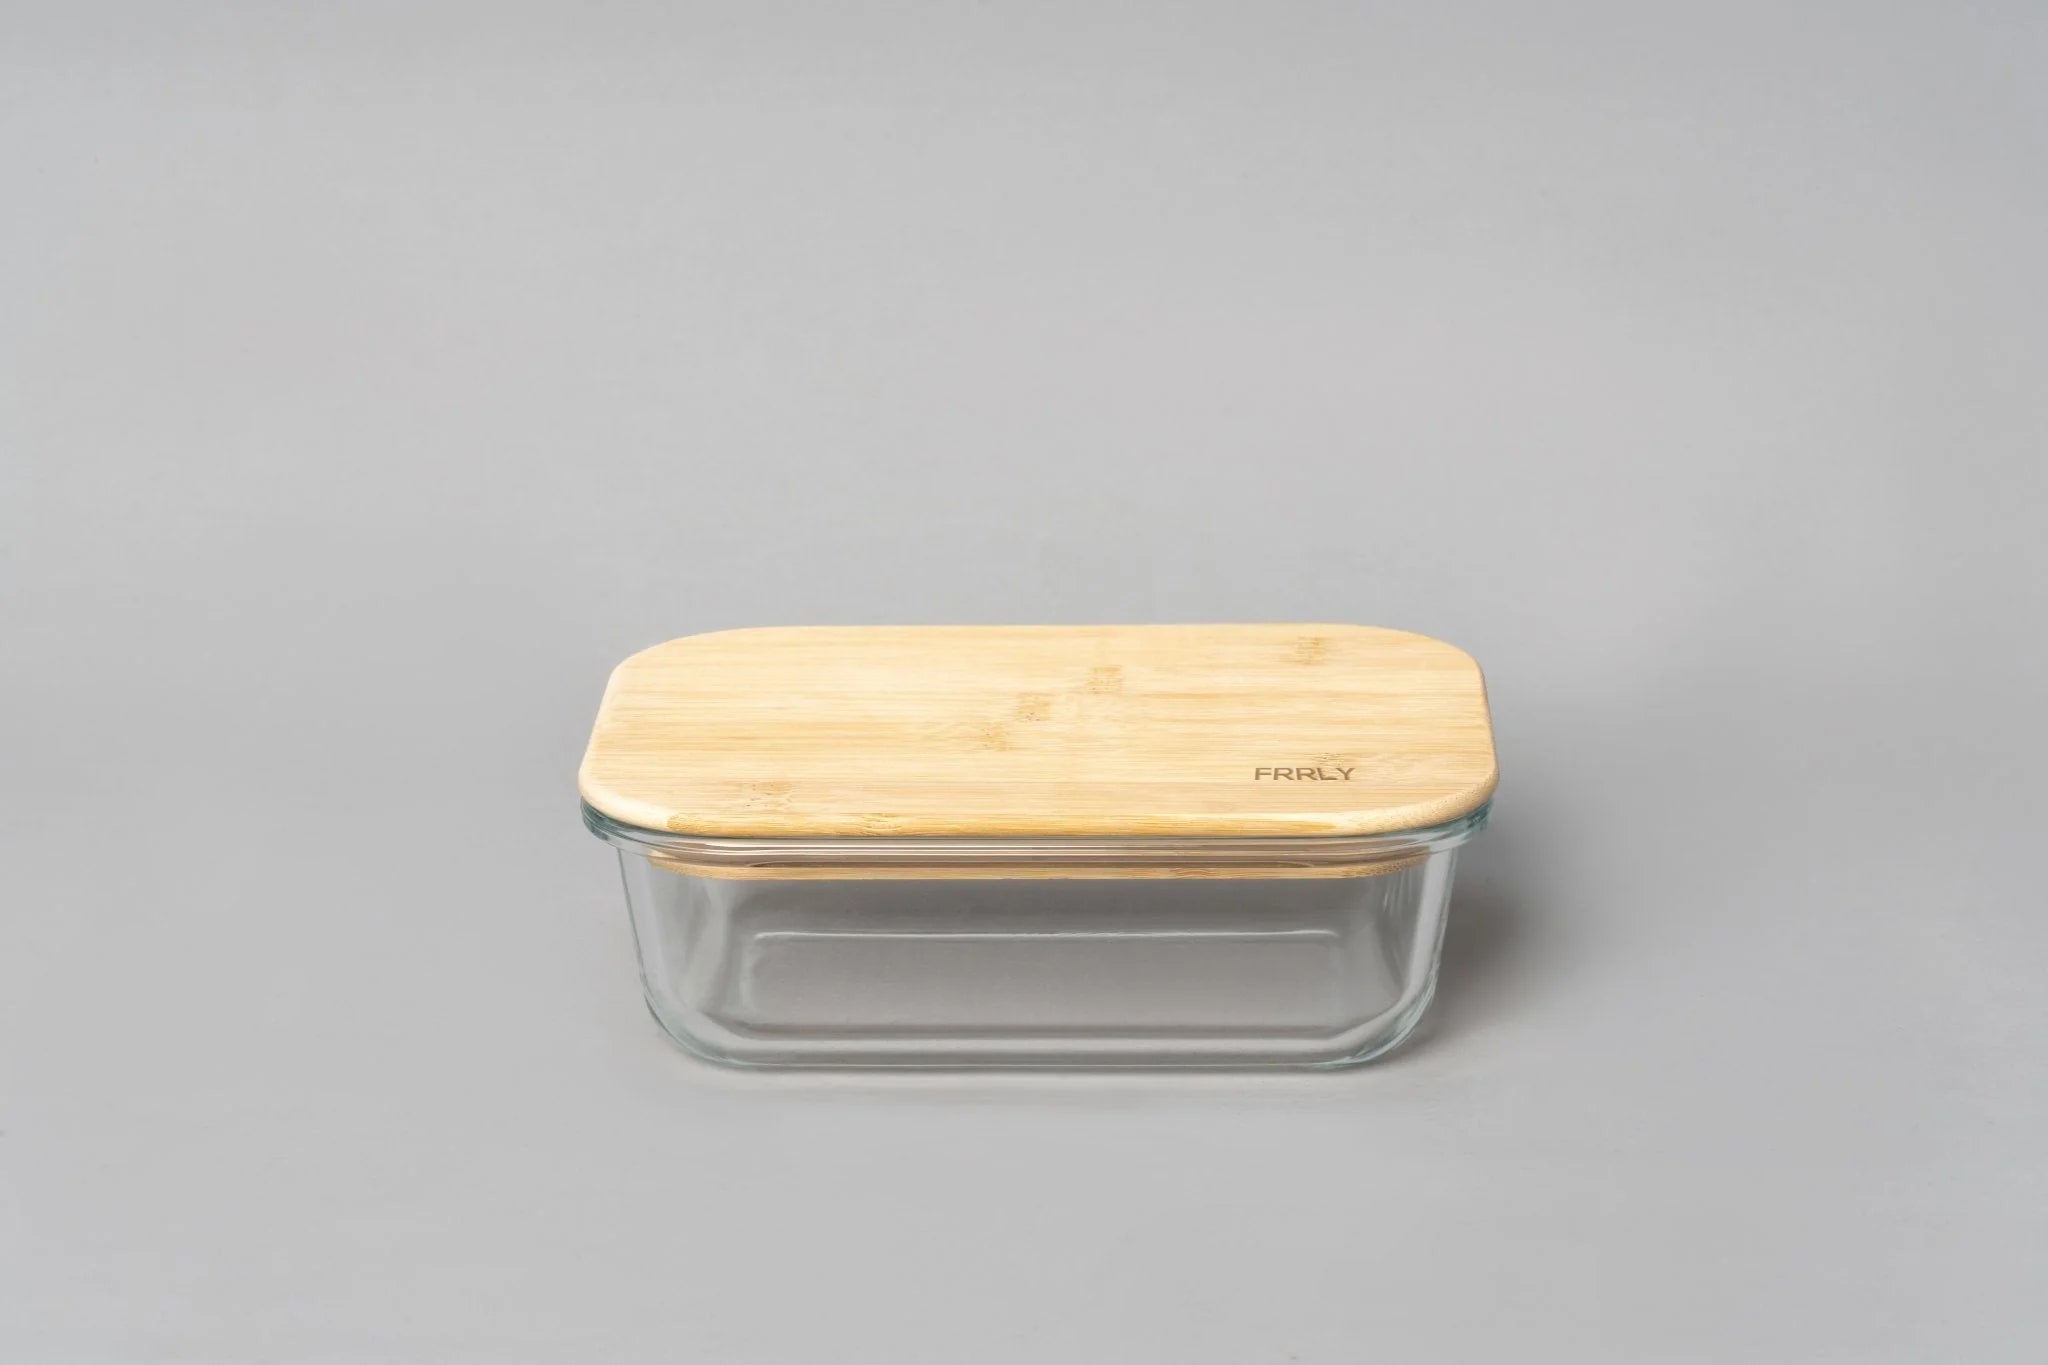 Glass Food Storage Containers with Eco-Friendly Bamboo Wooden Lids